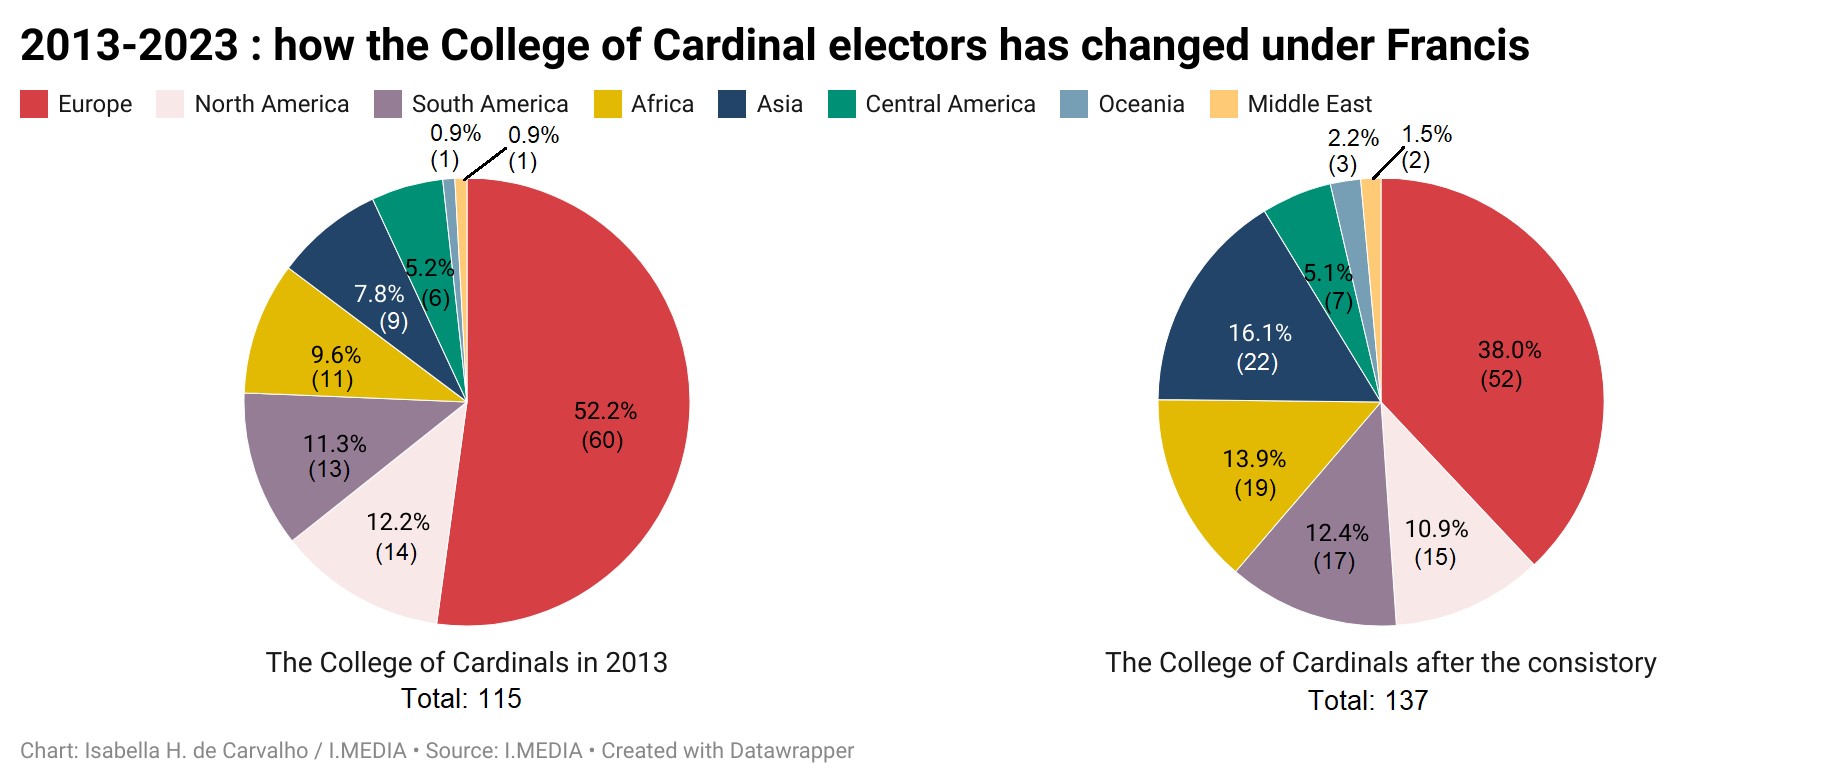 A graph showing the proportions by continent of the College of Cardinals in 2013 and after the next consistory on Sept 30